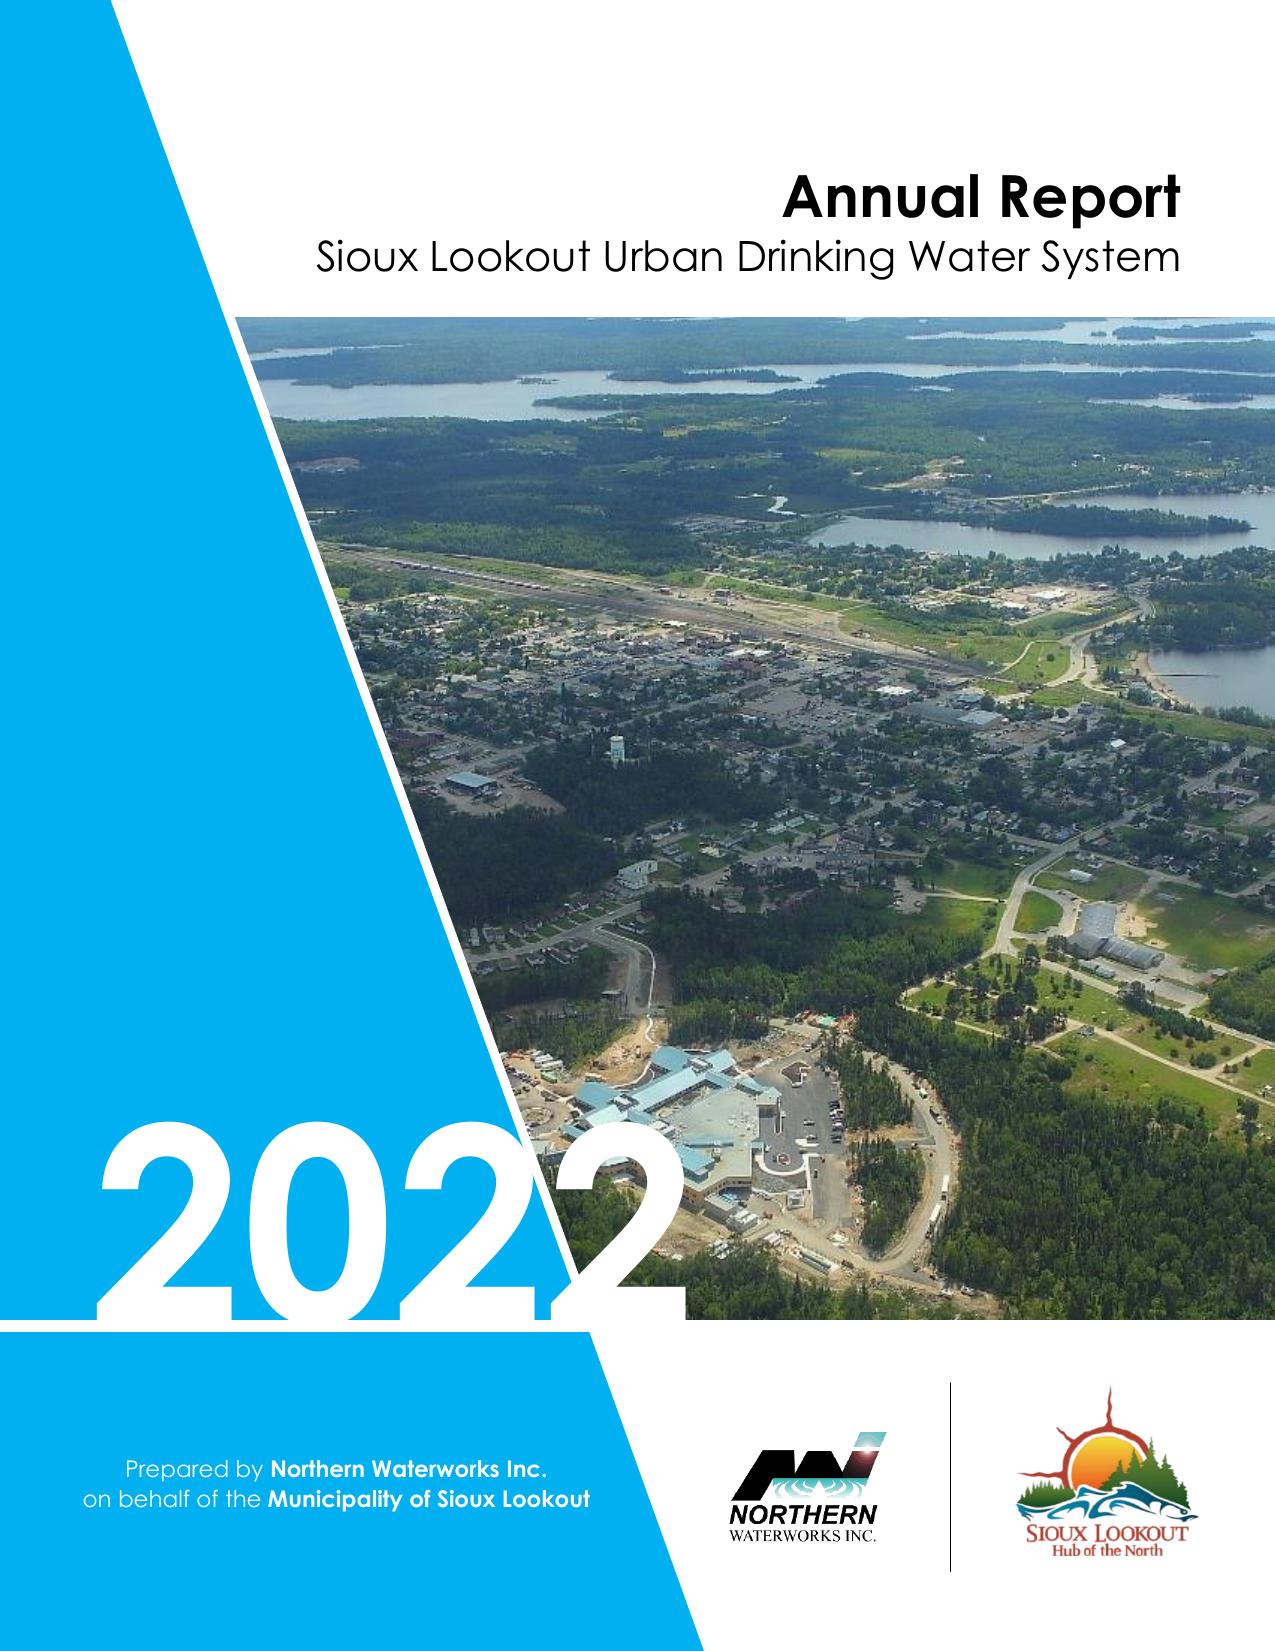 SIOUXLOOKOUT 2022 Annual Report